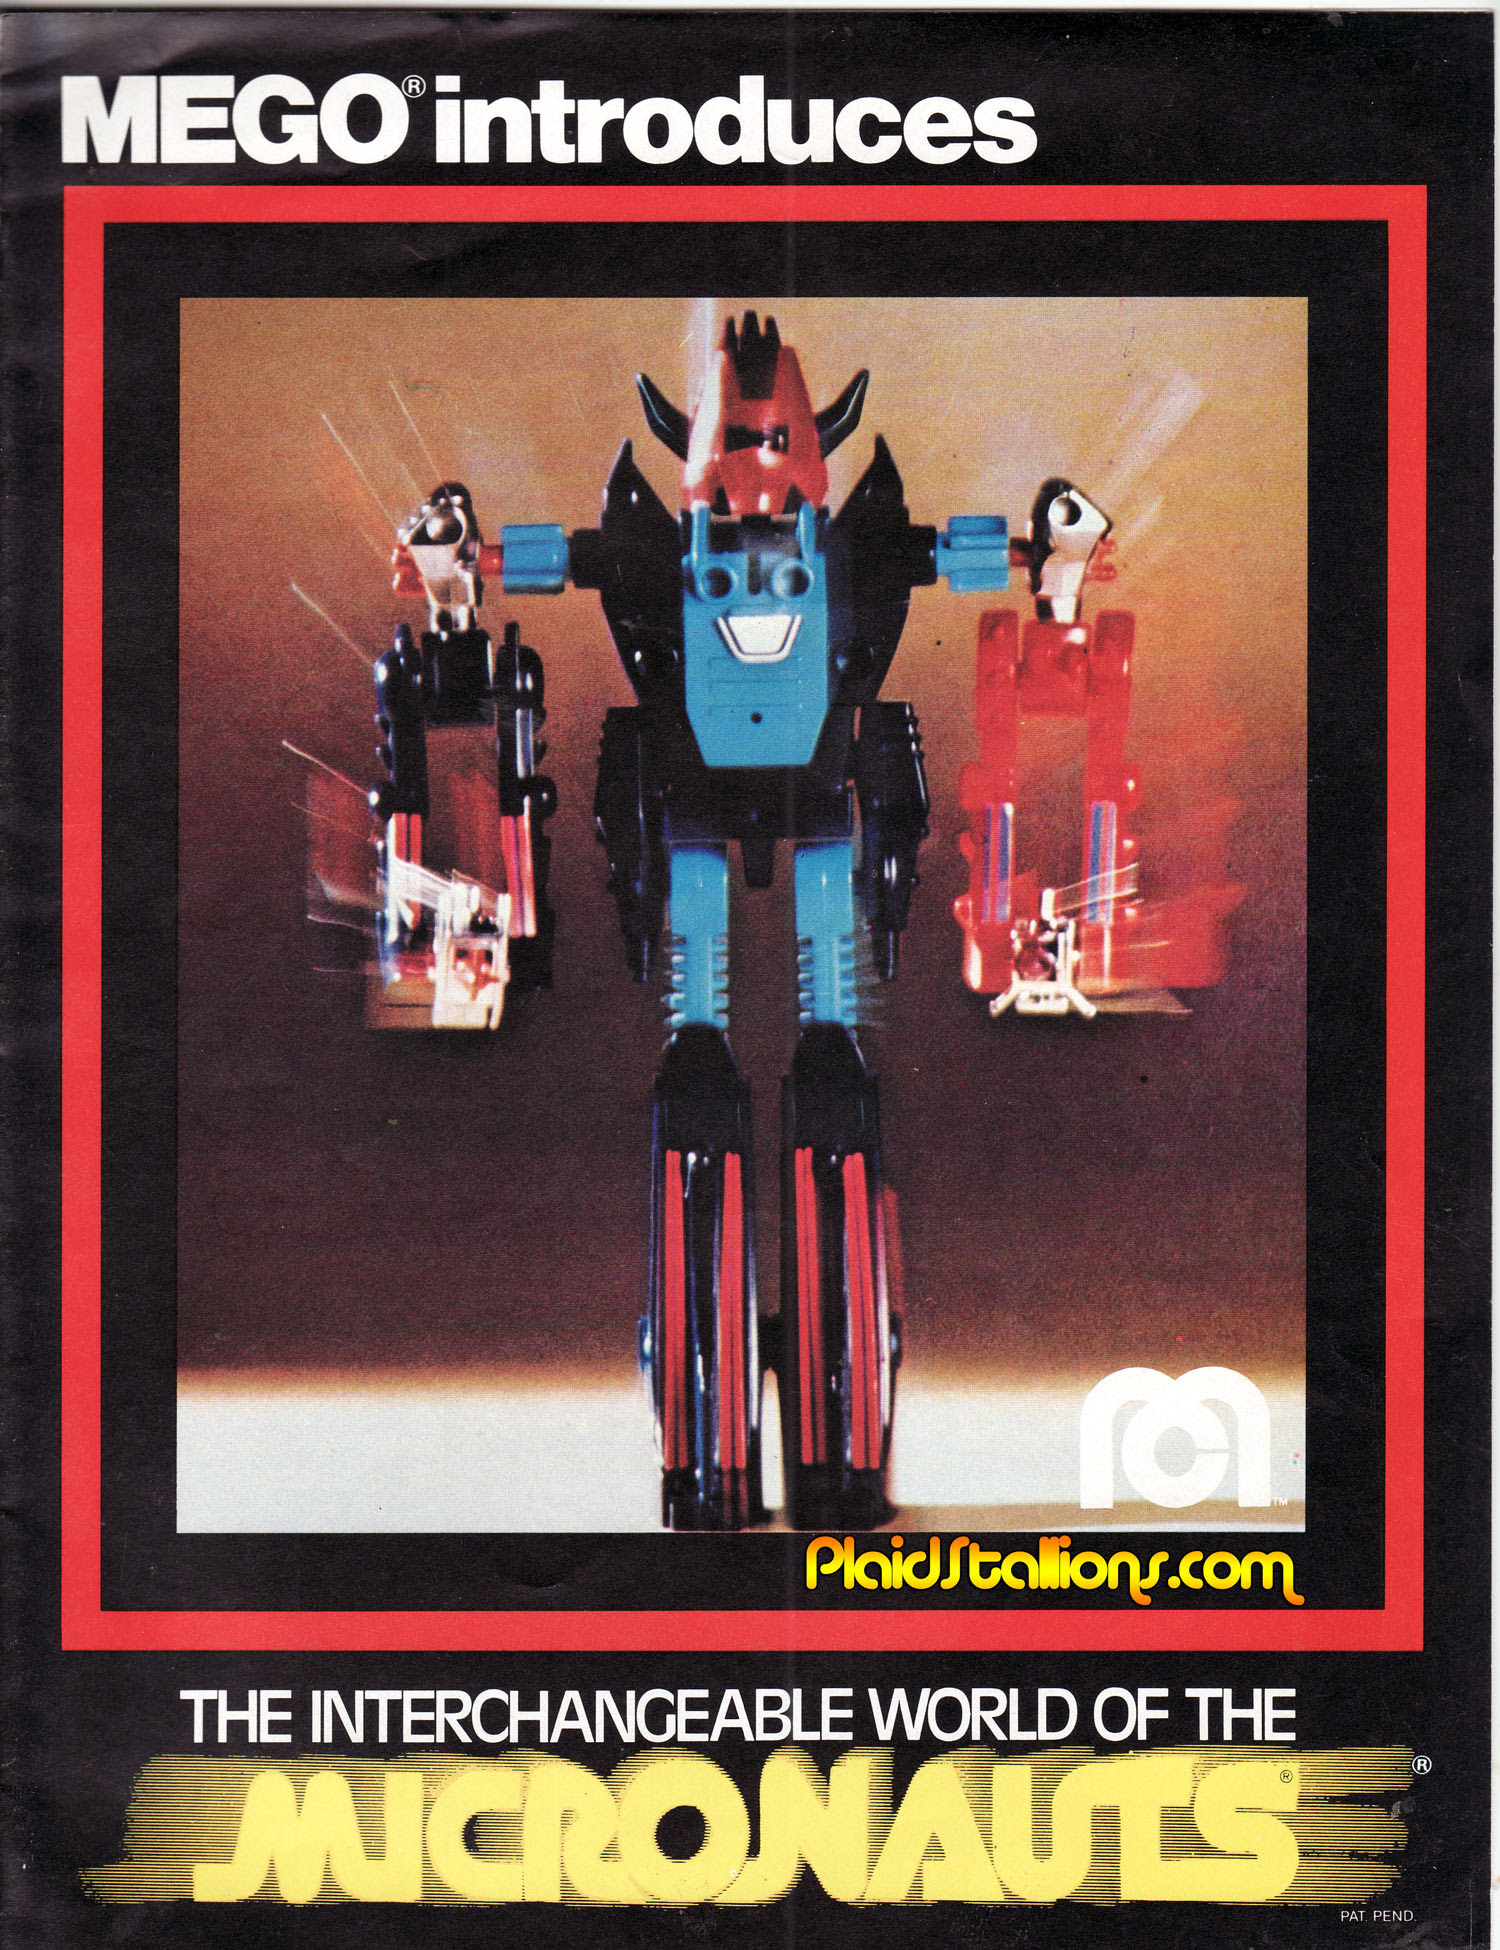 Mego Micronauts sales piece from 1978